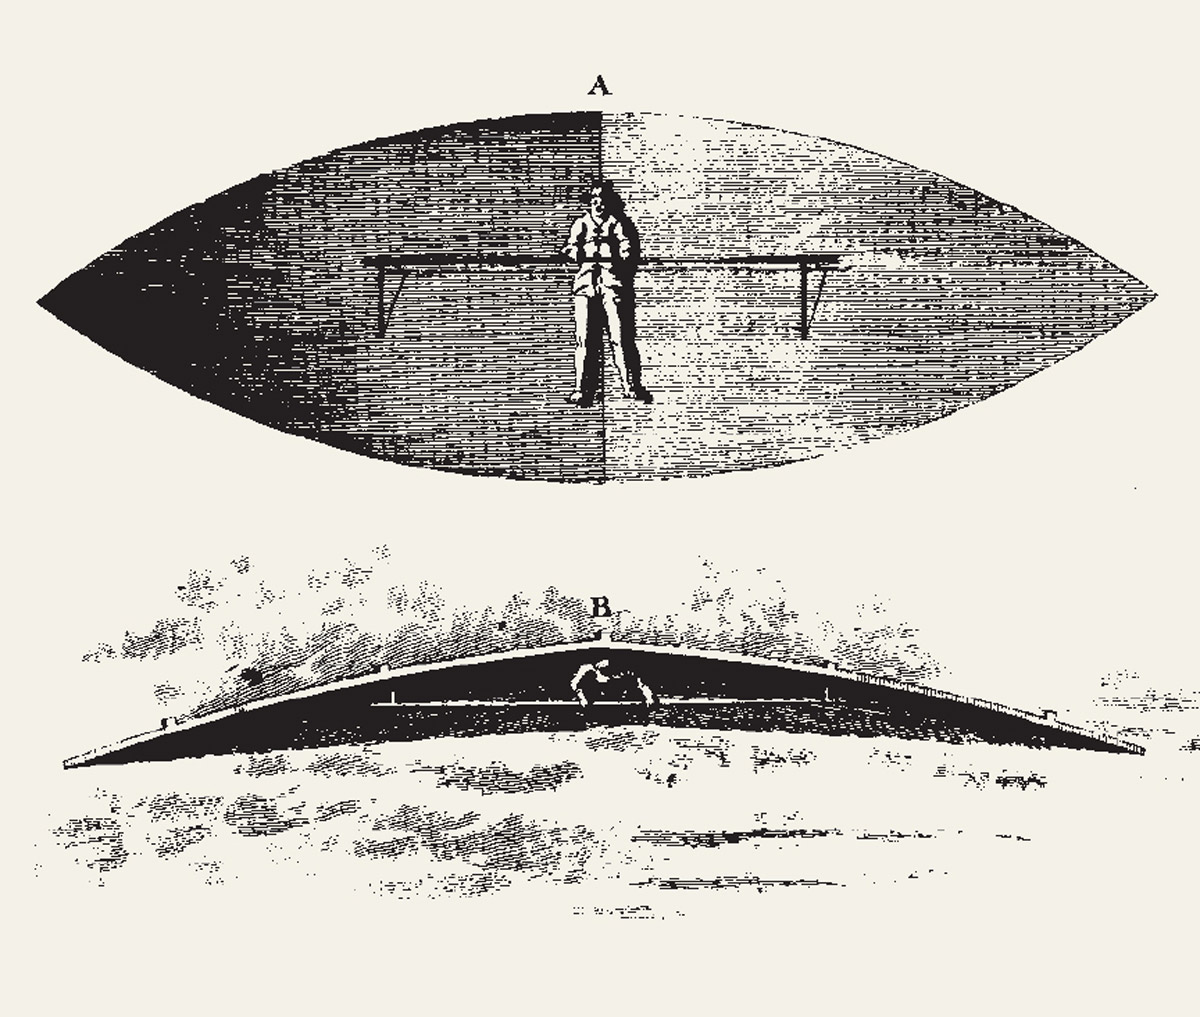 Print depicting Carl Meerwein’s ornithopter in flight, 1784.